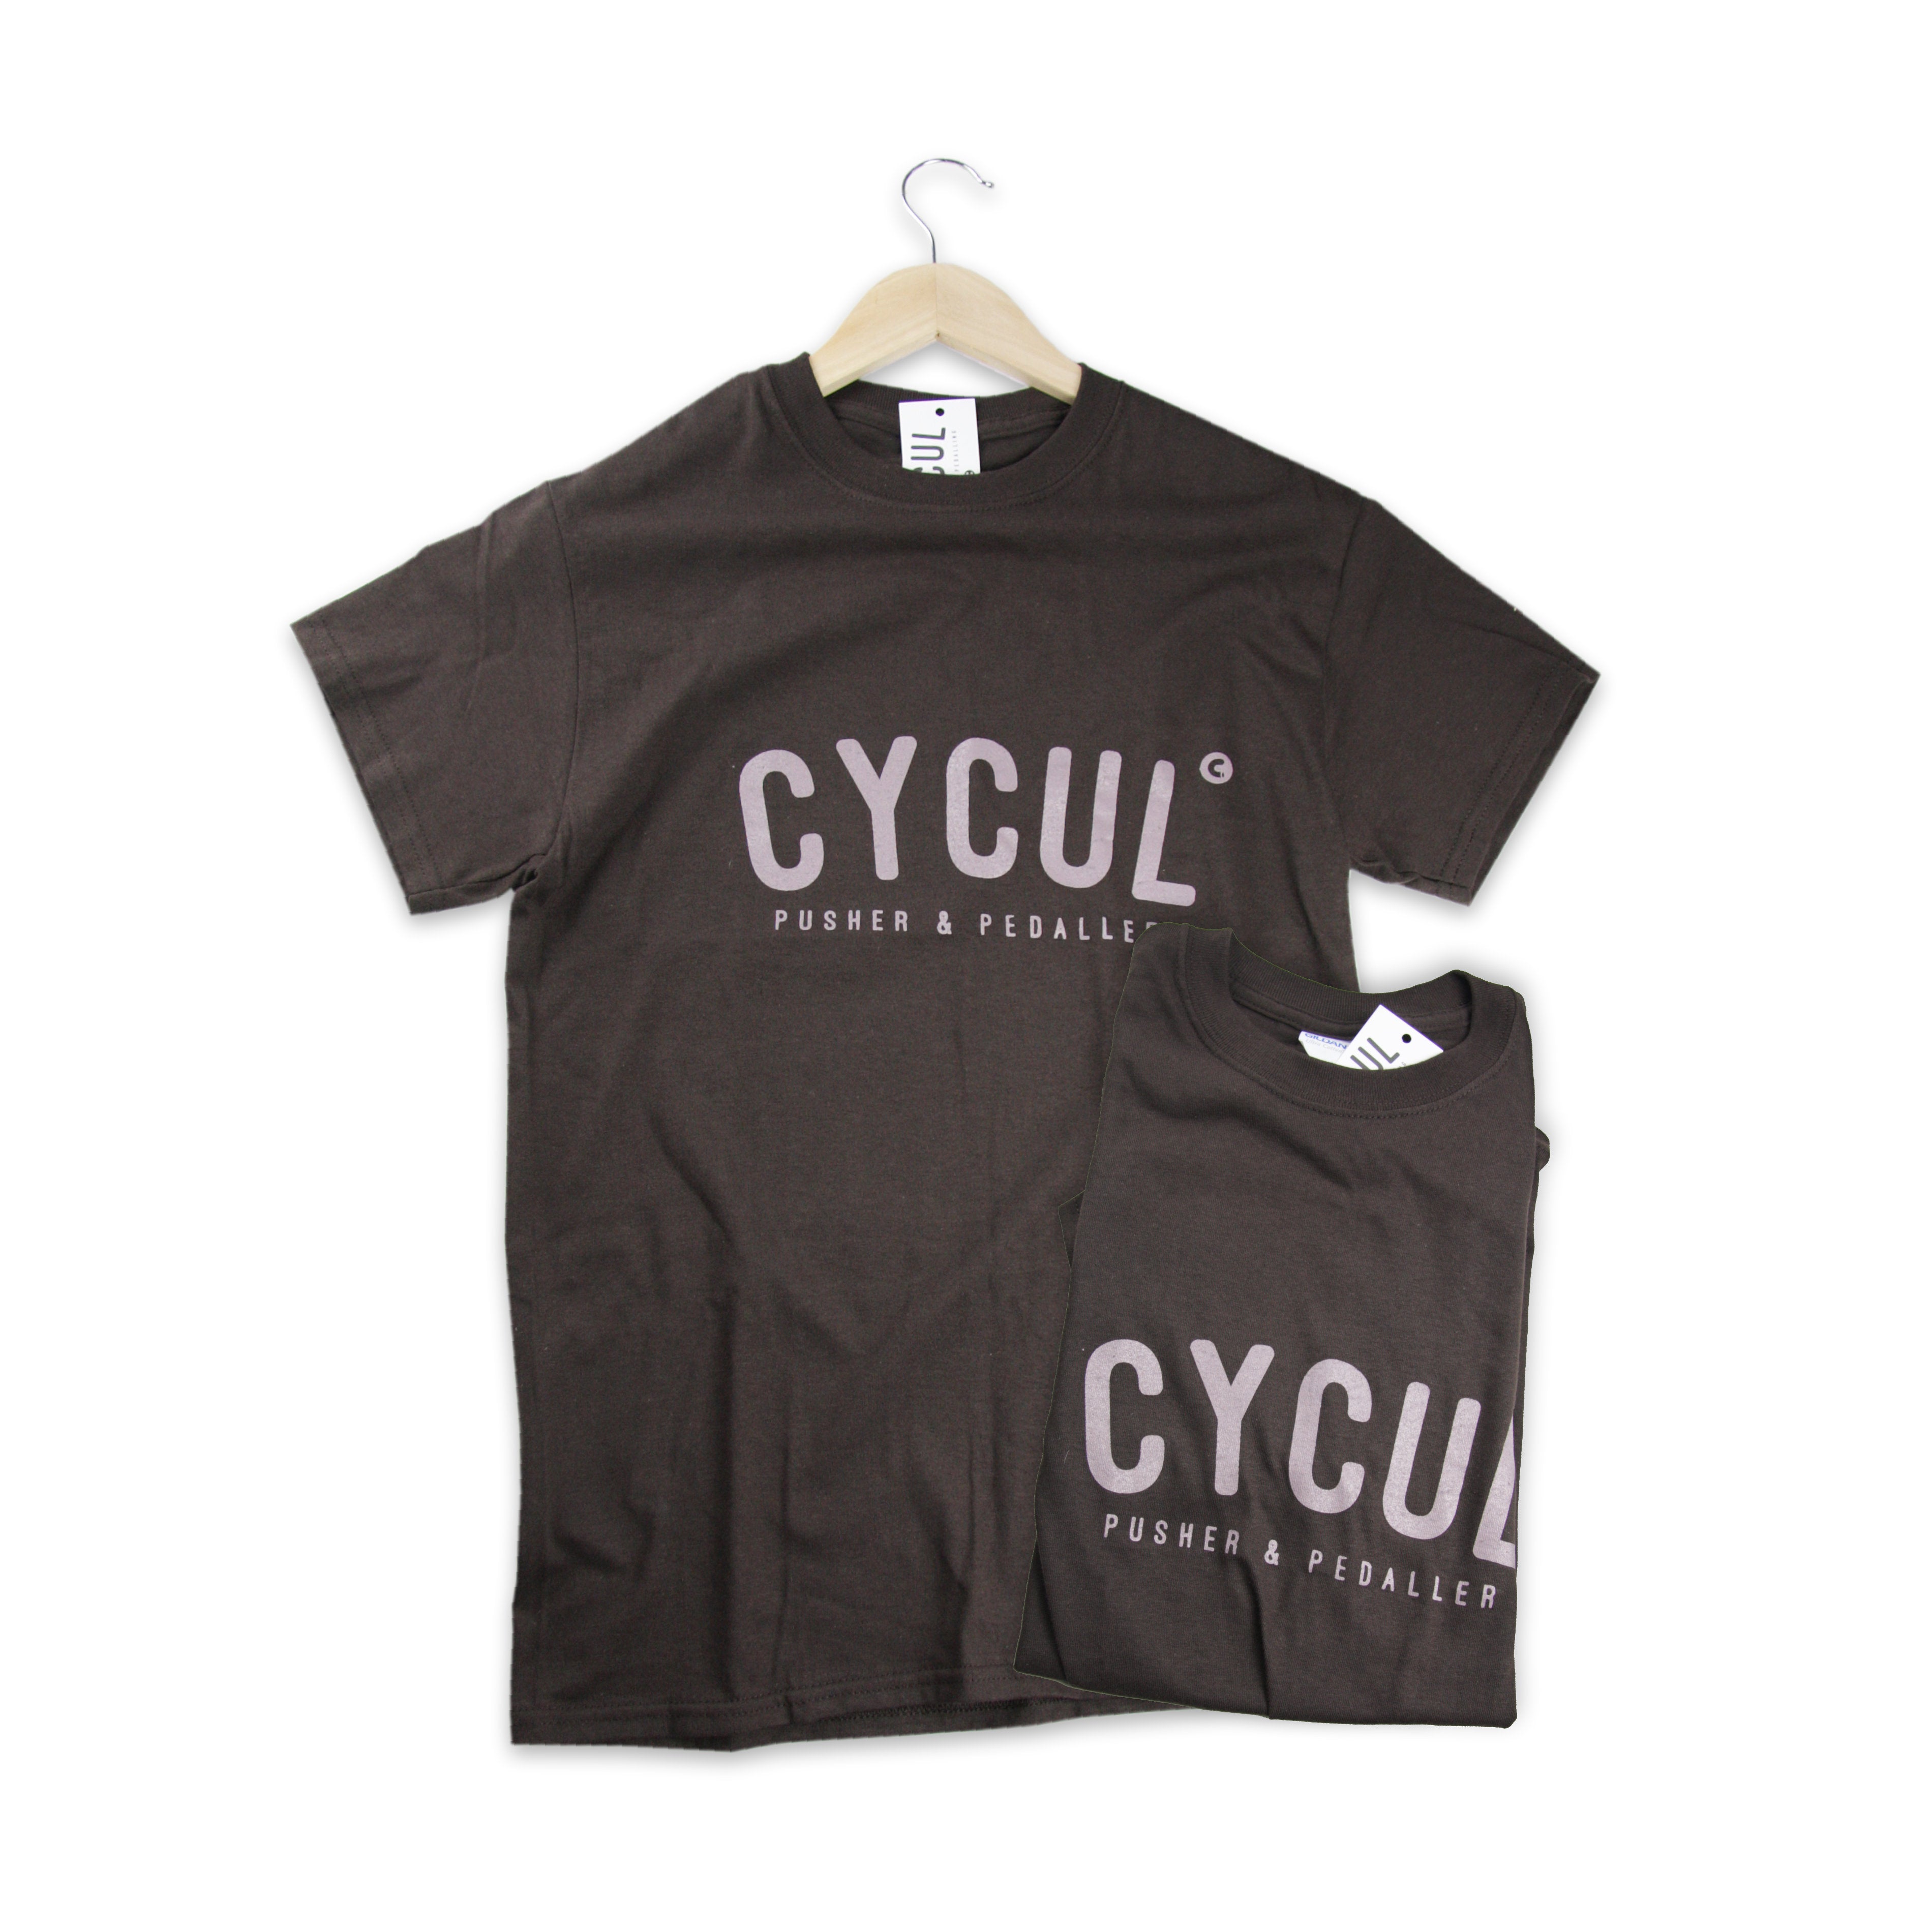 Cycul: Pusher & Pedaller